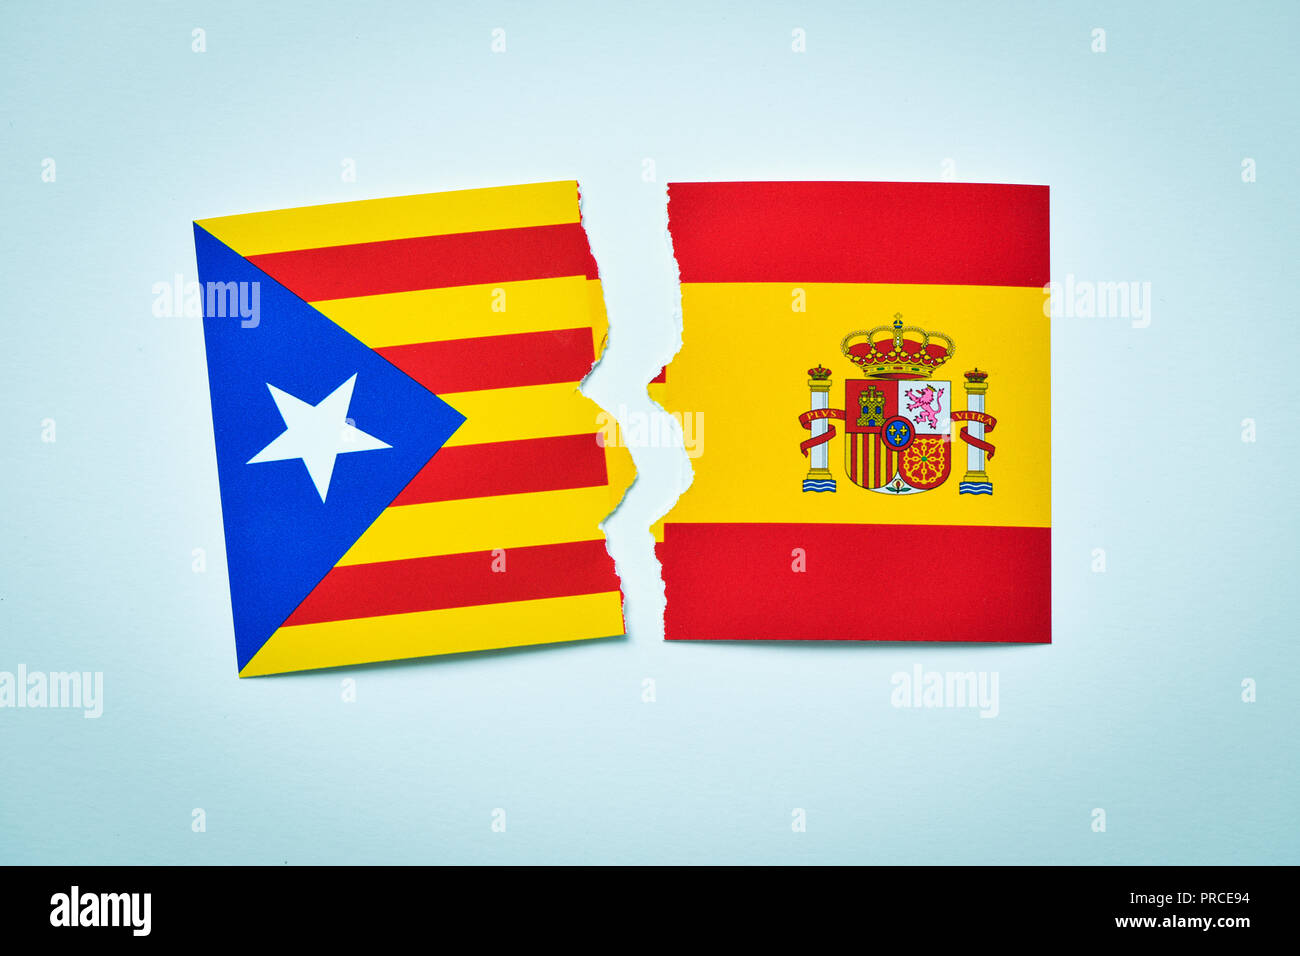 the Estelada, the Catalan pro-independence flag, and the flag of Spain, broken on an off-white background Stock Photo